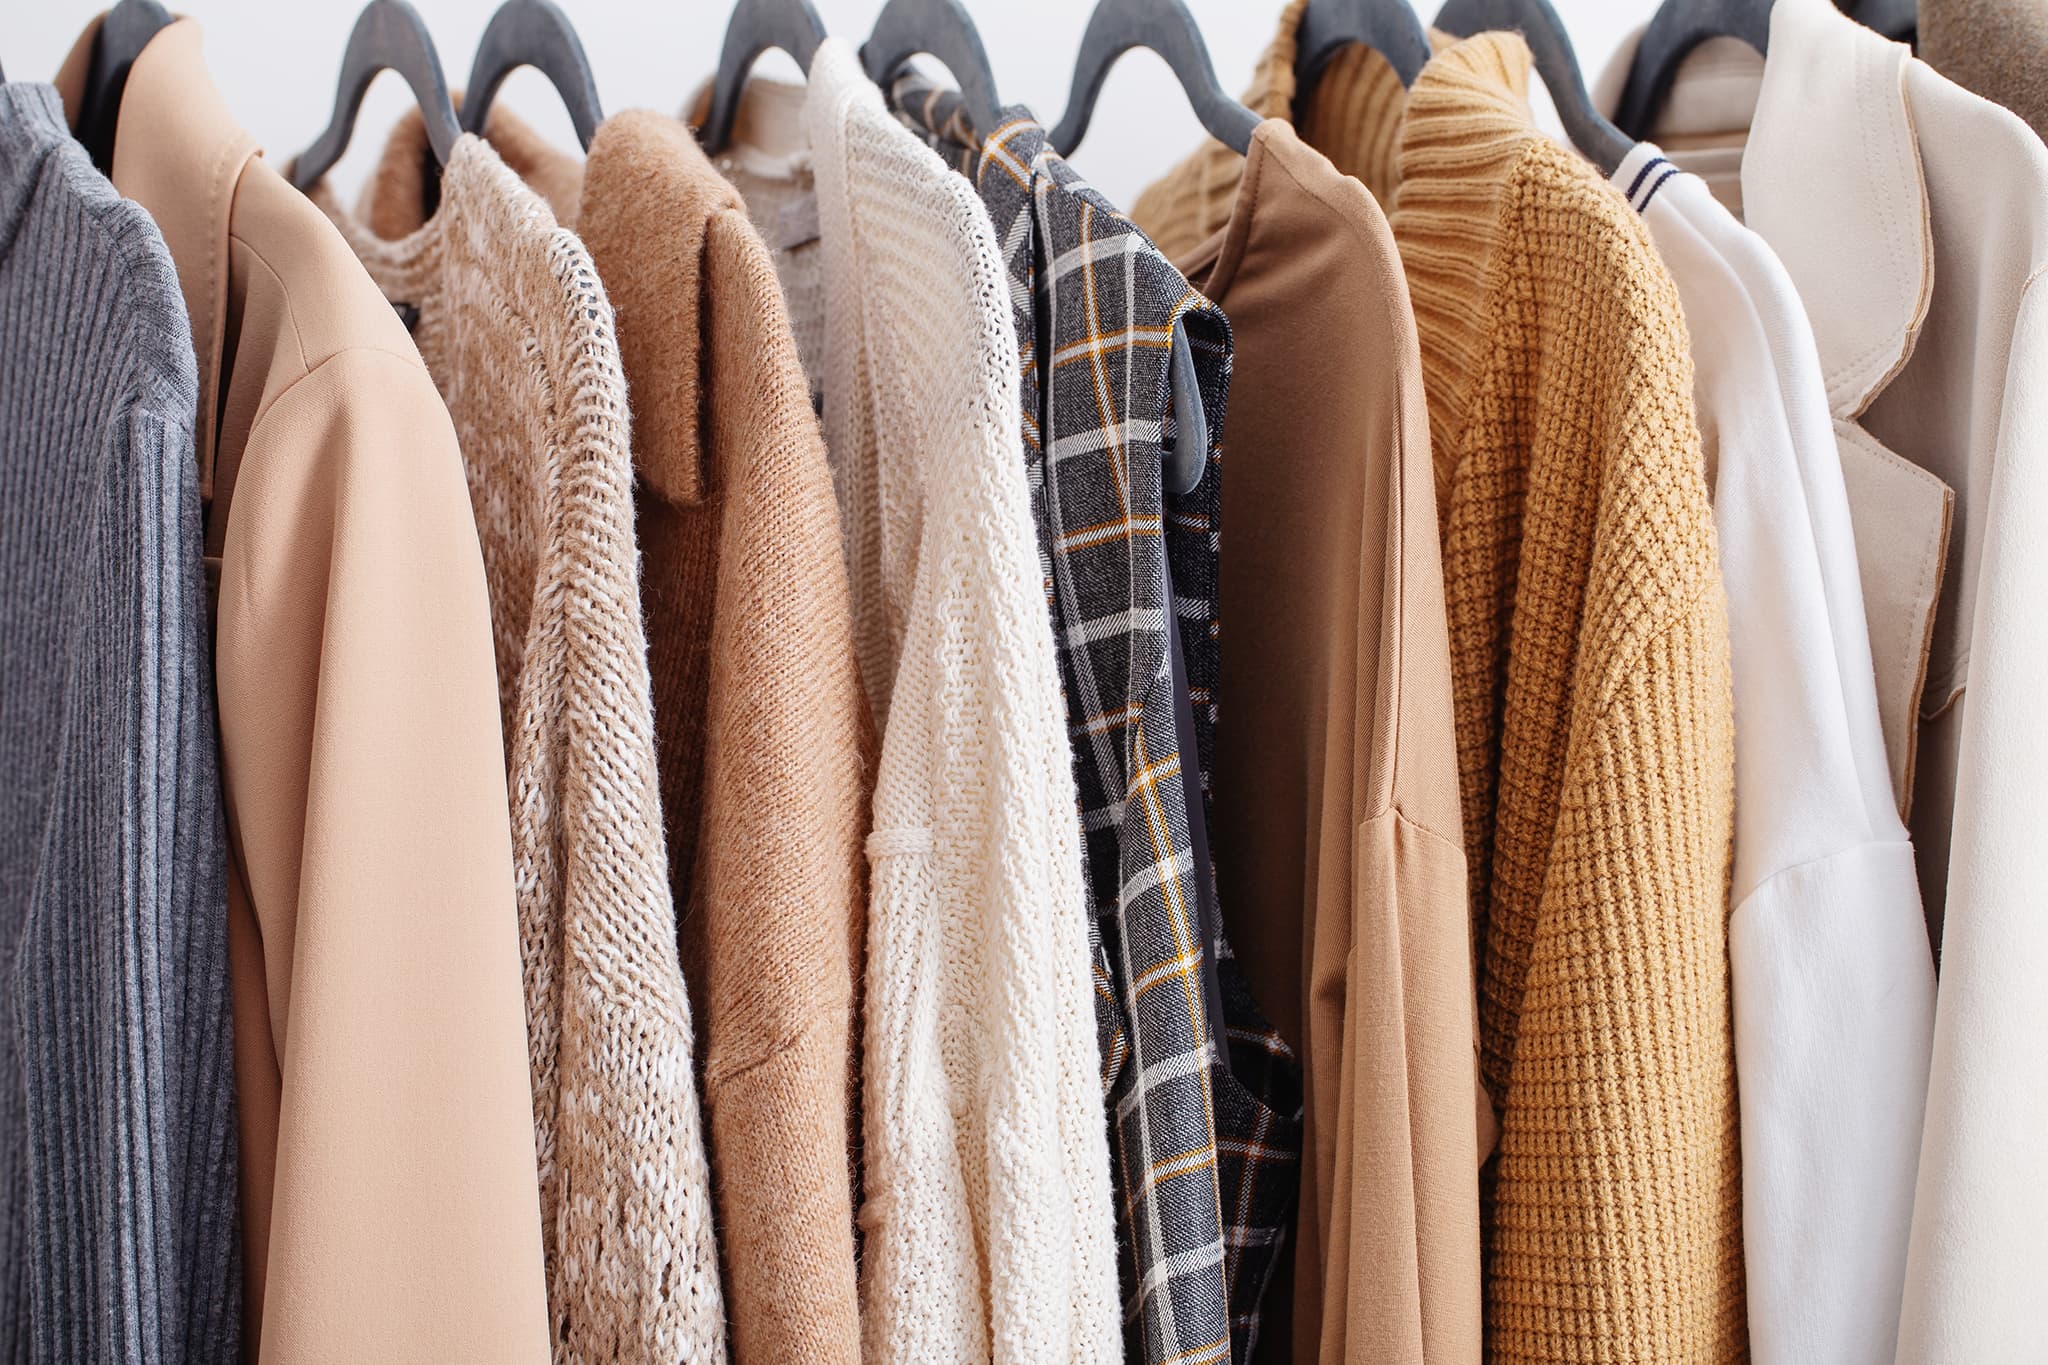 Neutral-colored coats can work well with anything in your closet